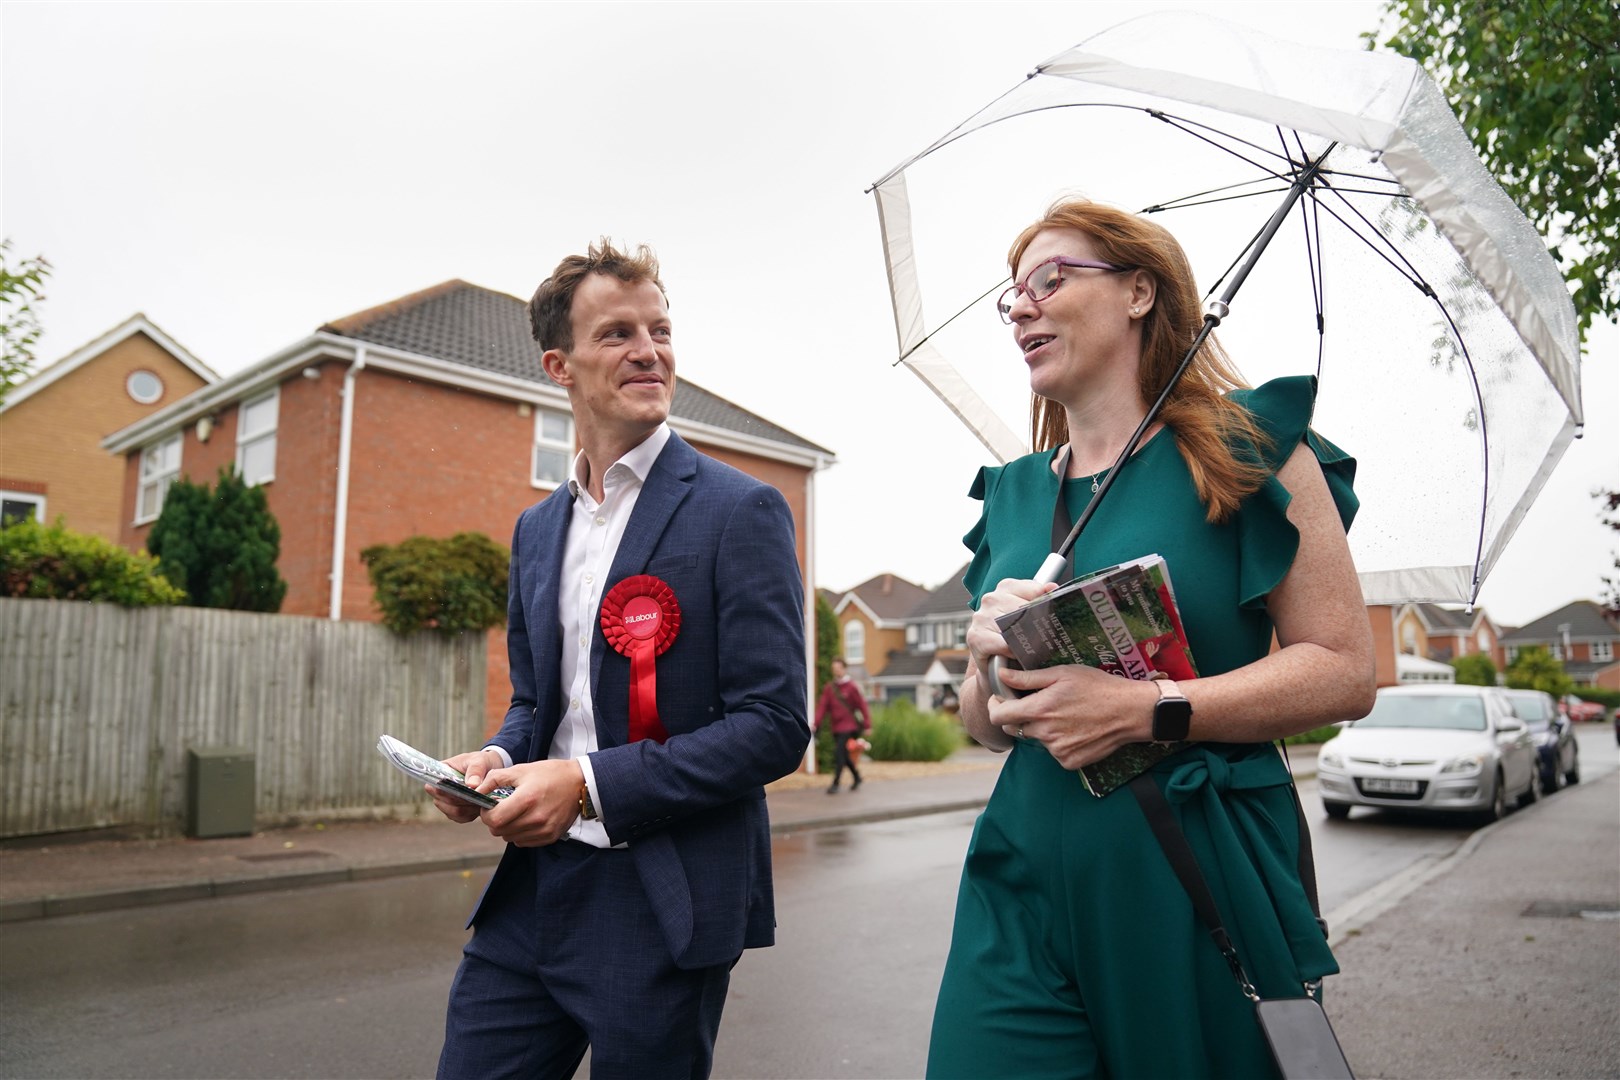 Deputy Labour leader Angela Rayner campaigning in Mid Bedfordshire’s Shefford with Labour candidate Alistair Strathern (Jacob King/PA)